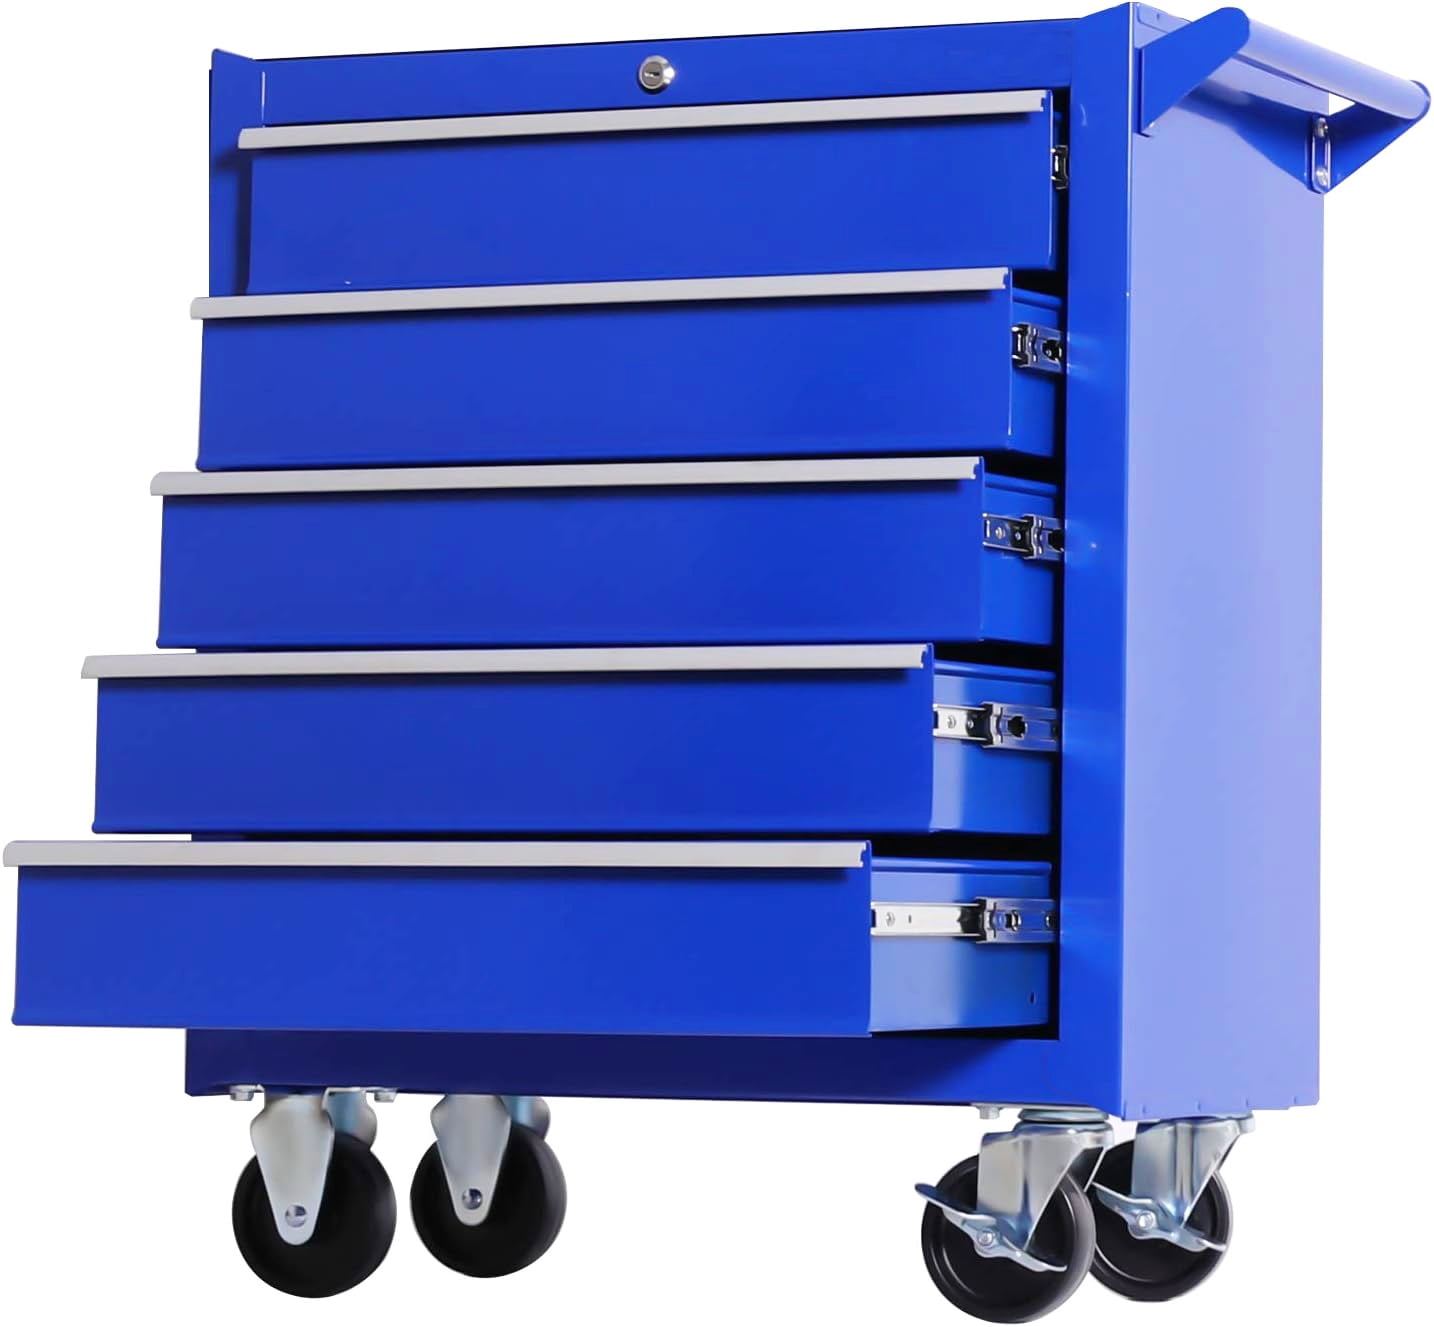 Seizeen Rolling Tool Boxes on Wheels, 5 Drawers Tool Chest Storage Cabinet  Metal, Multifunctional Tool Cart Lockable for Garage Workshop, 30''H Blue